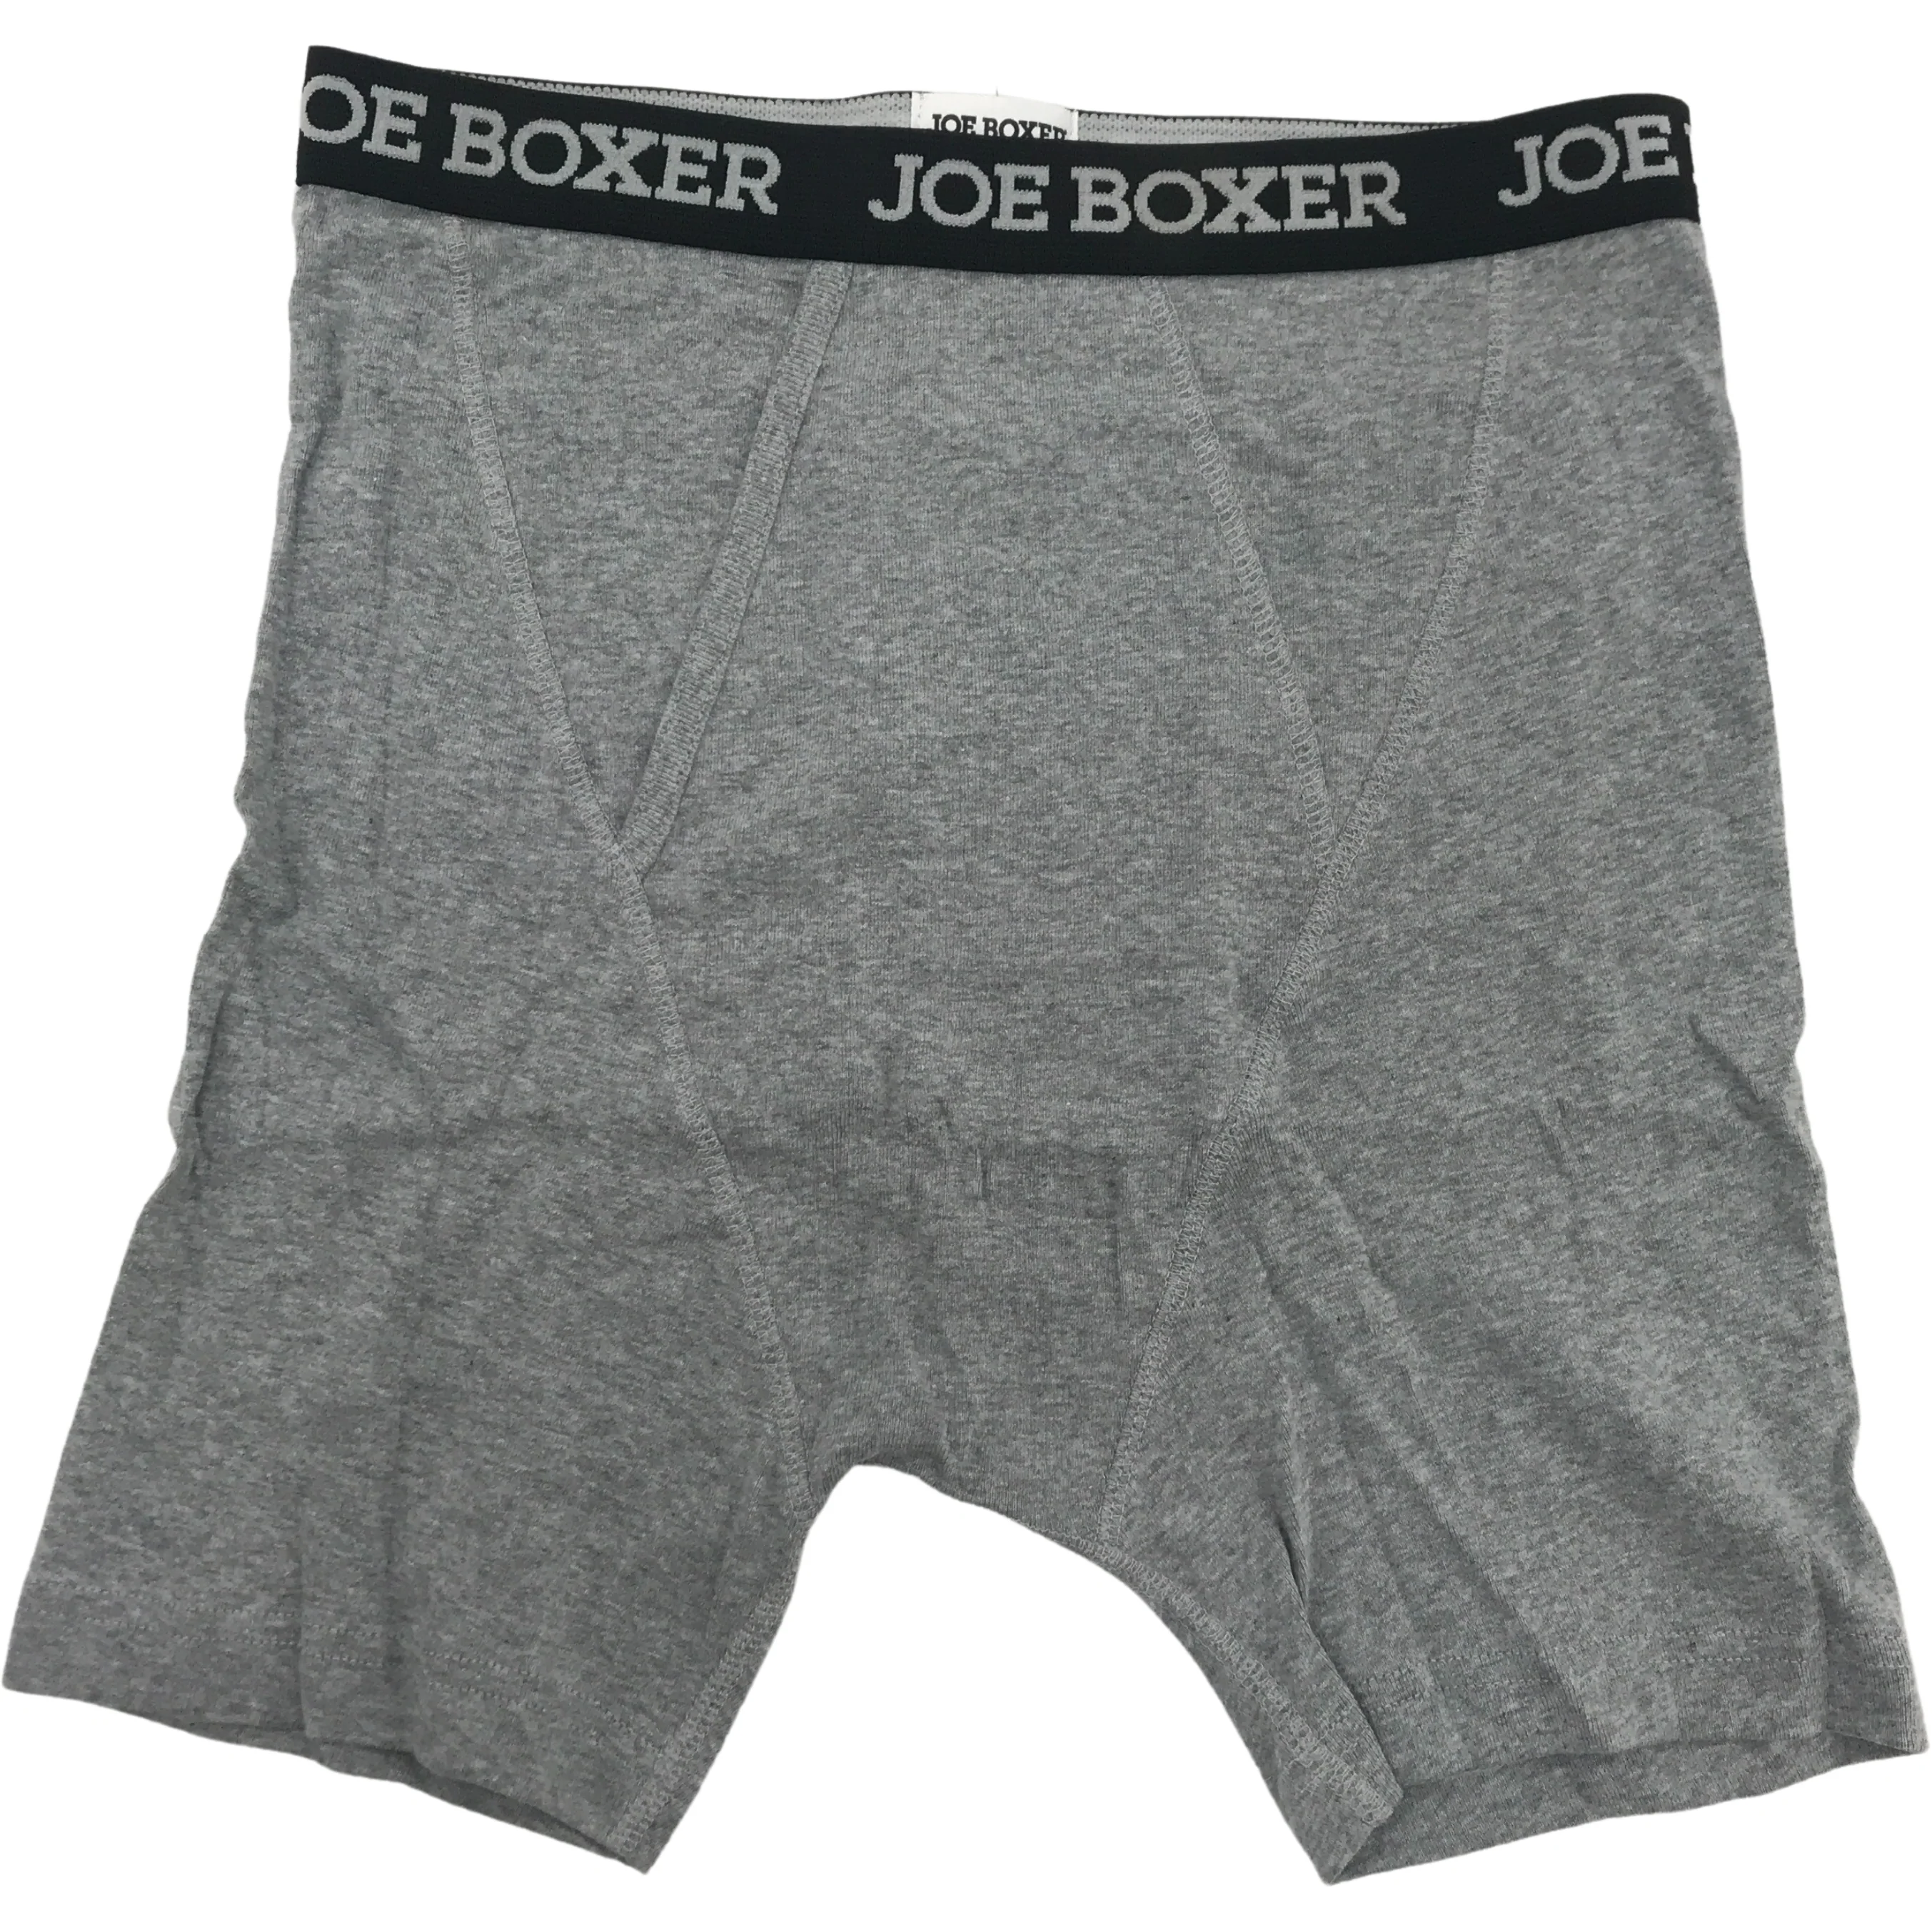 Joe Boxer Men's Underwear / Fitted Boxers / 3 Pack / Grey / Small